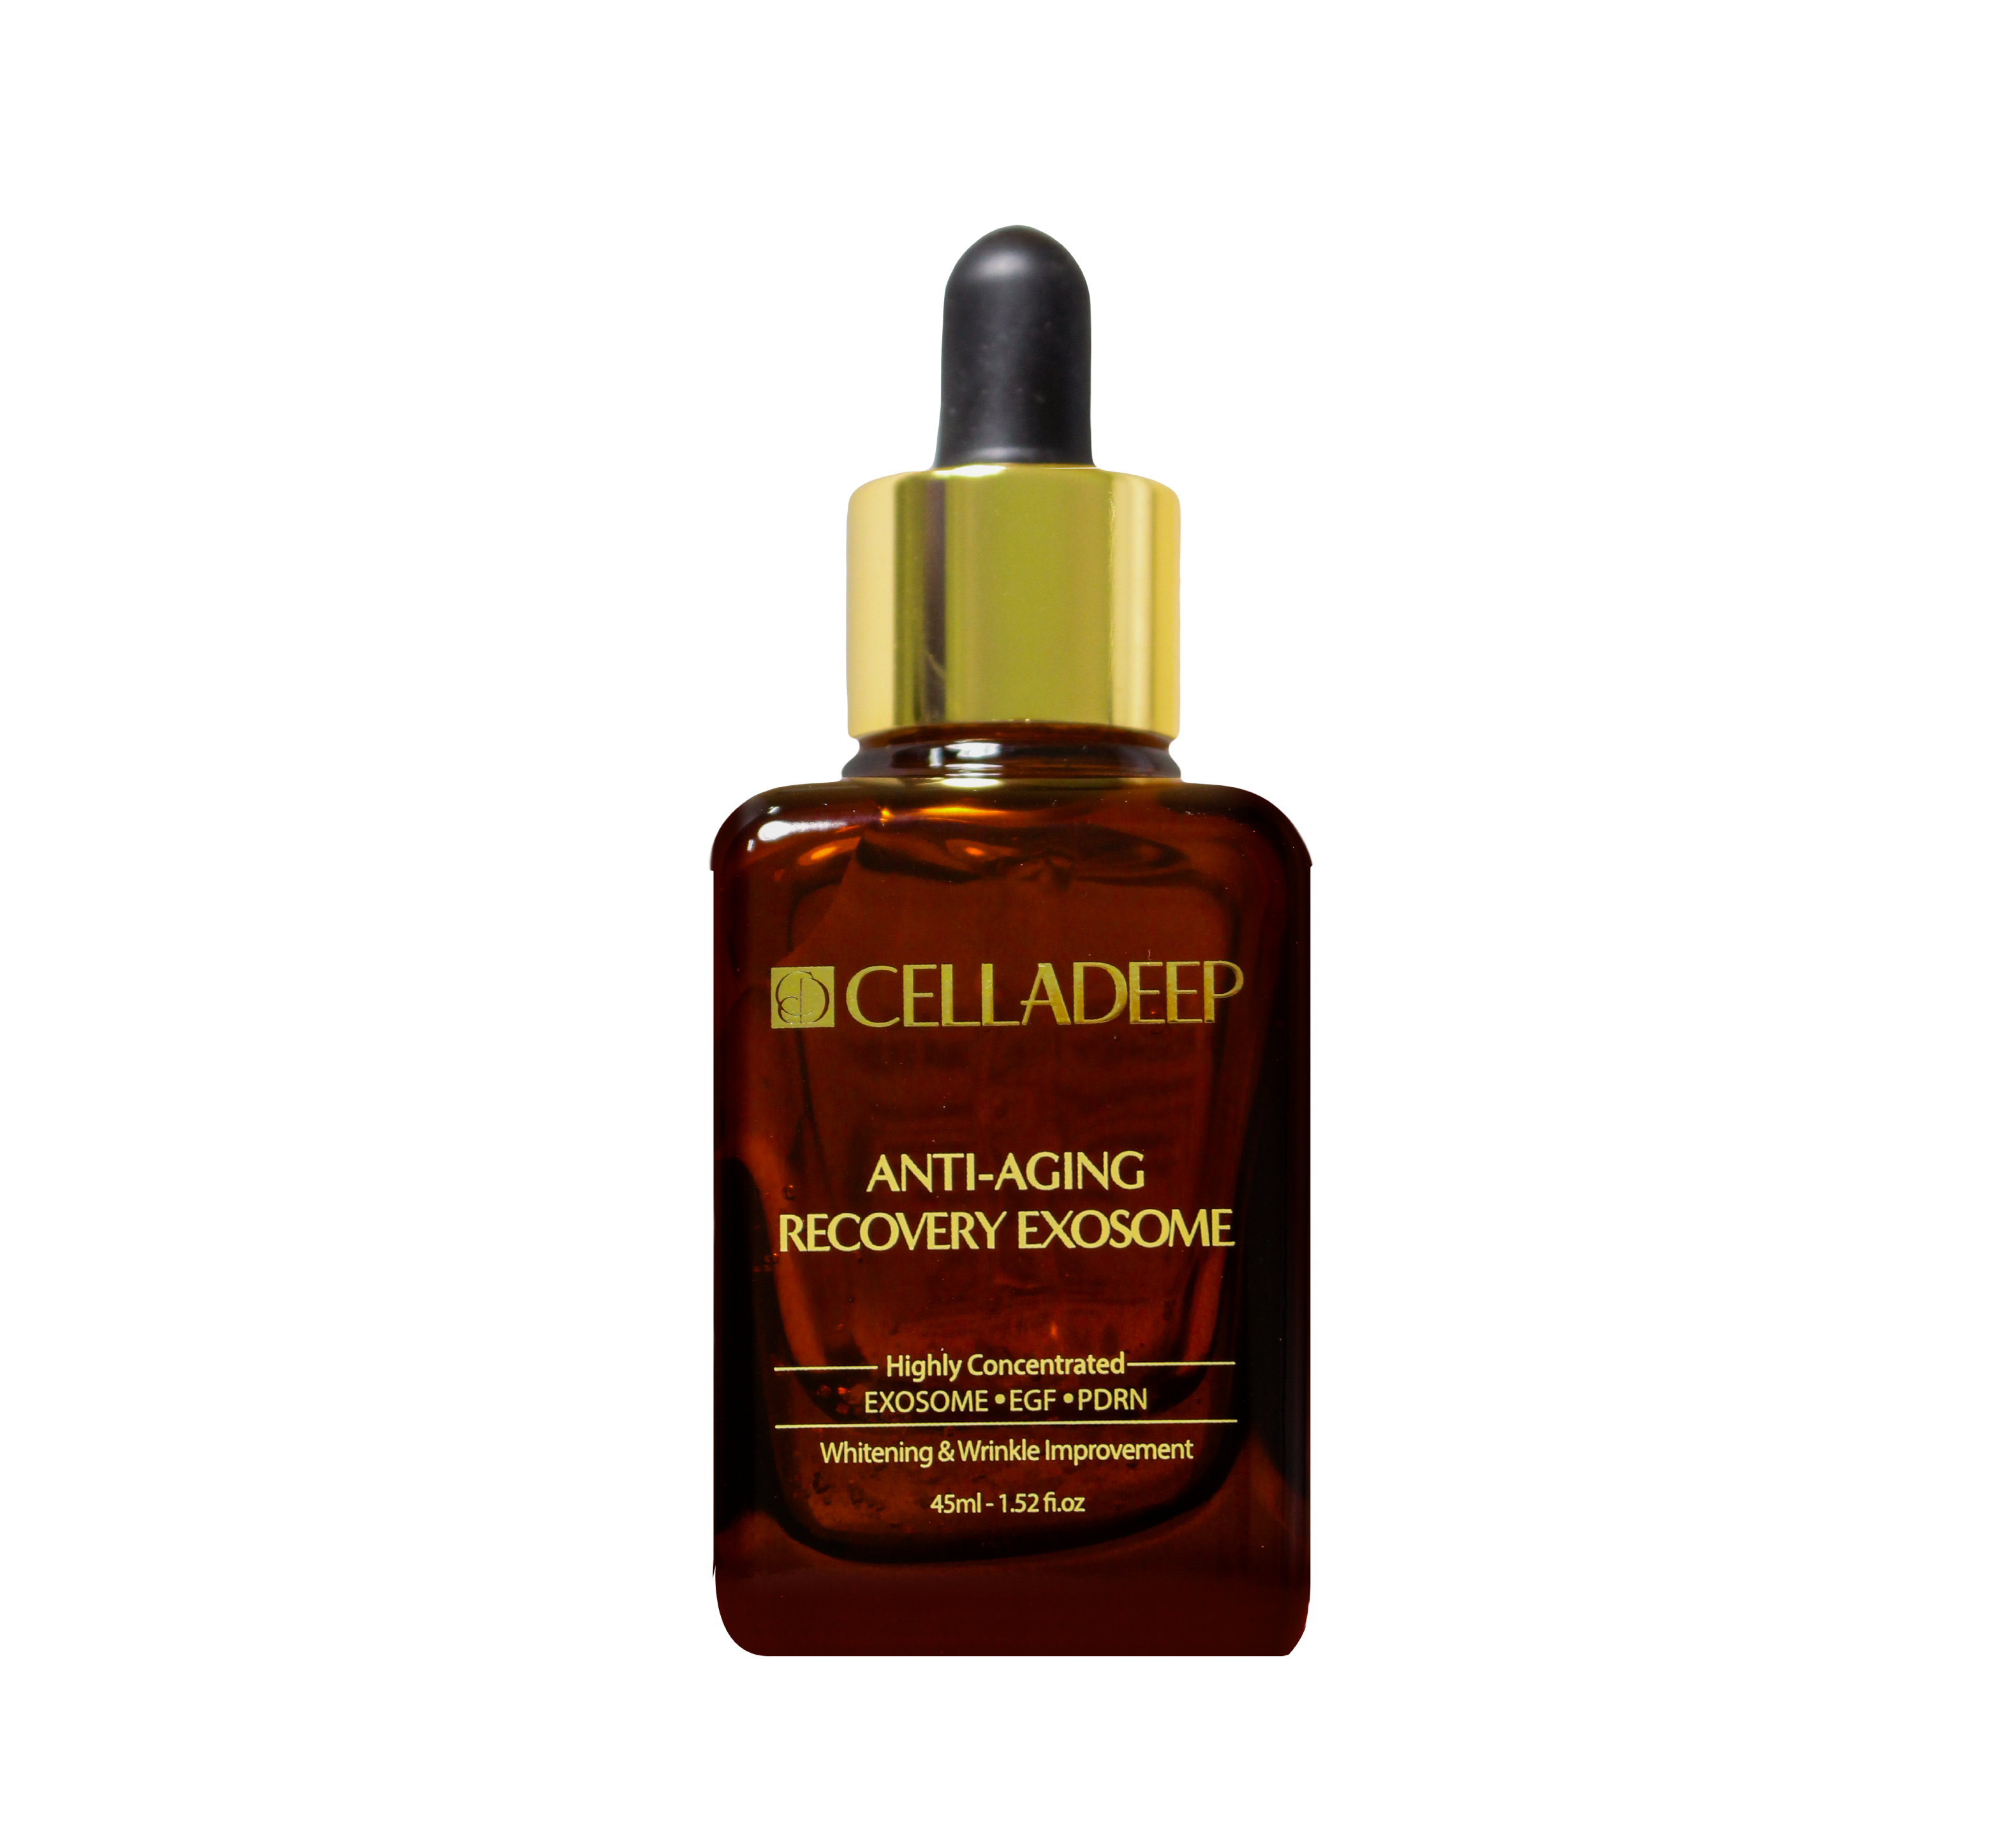 CELLADEEP Anti Aging Recovery Exosome in a dark brown serum bottle with golden cap and black dropper